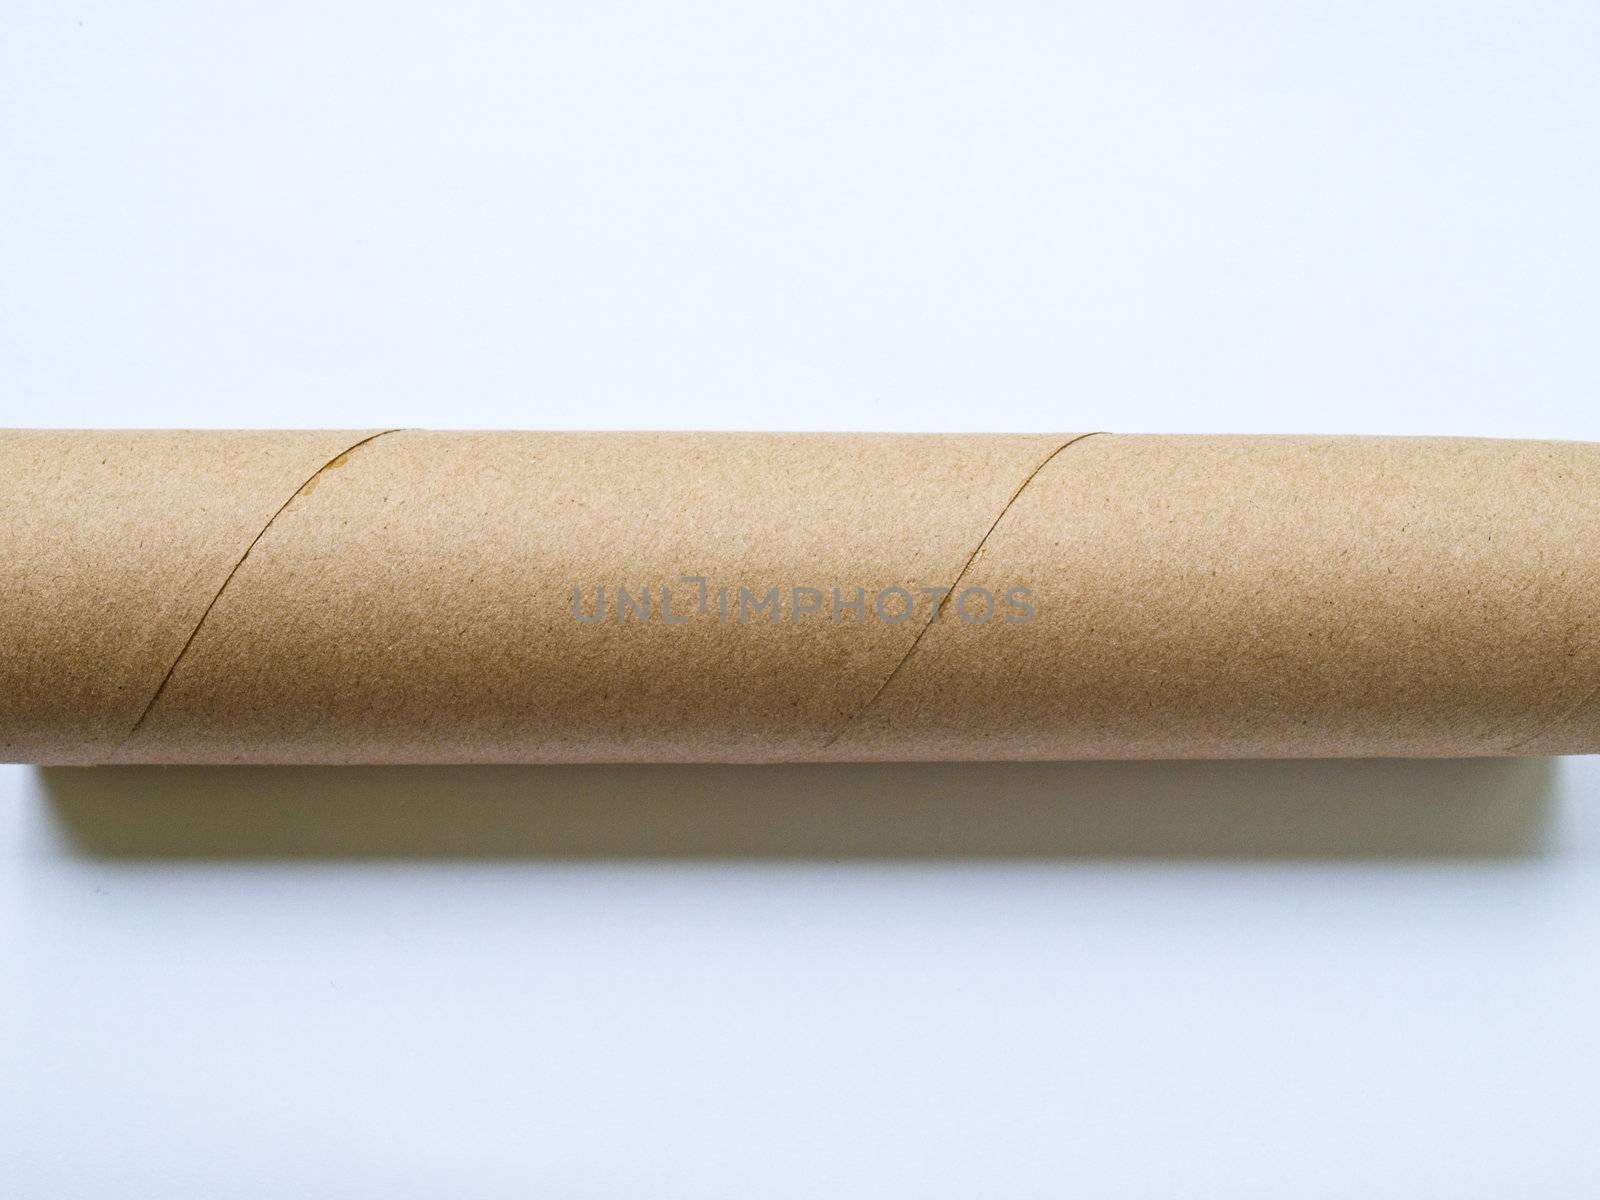 Light brown roll paper isolated on white background